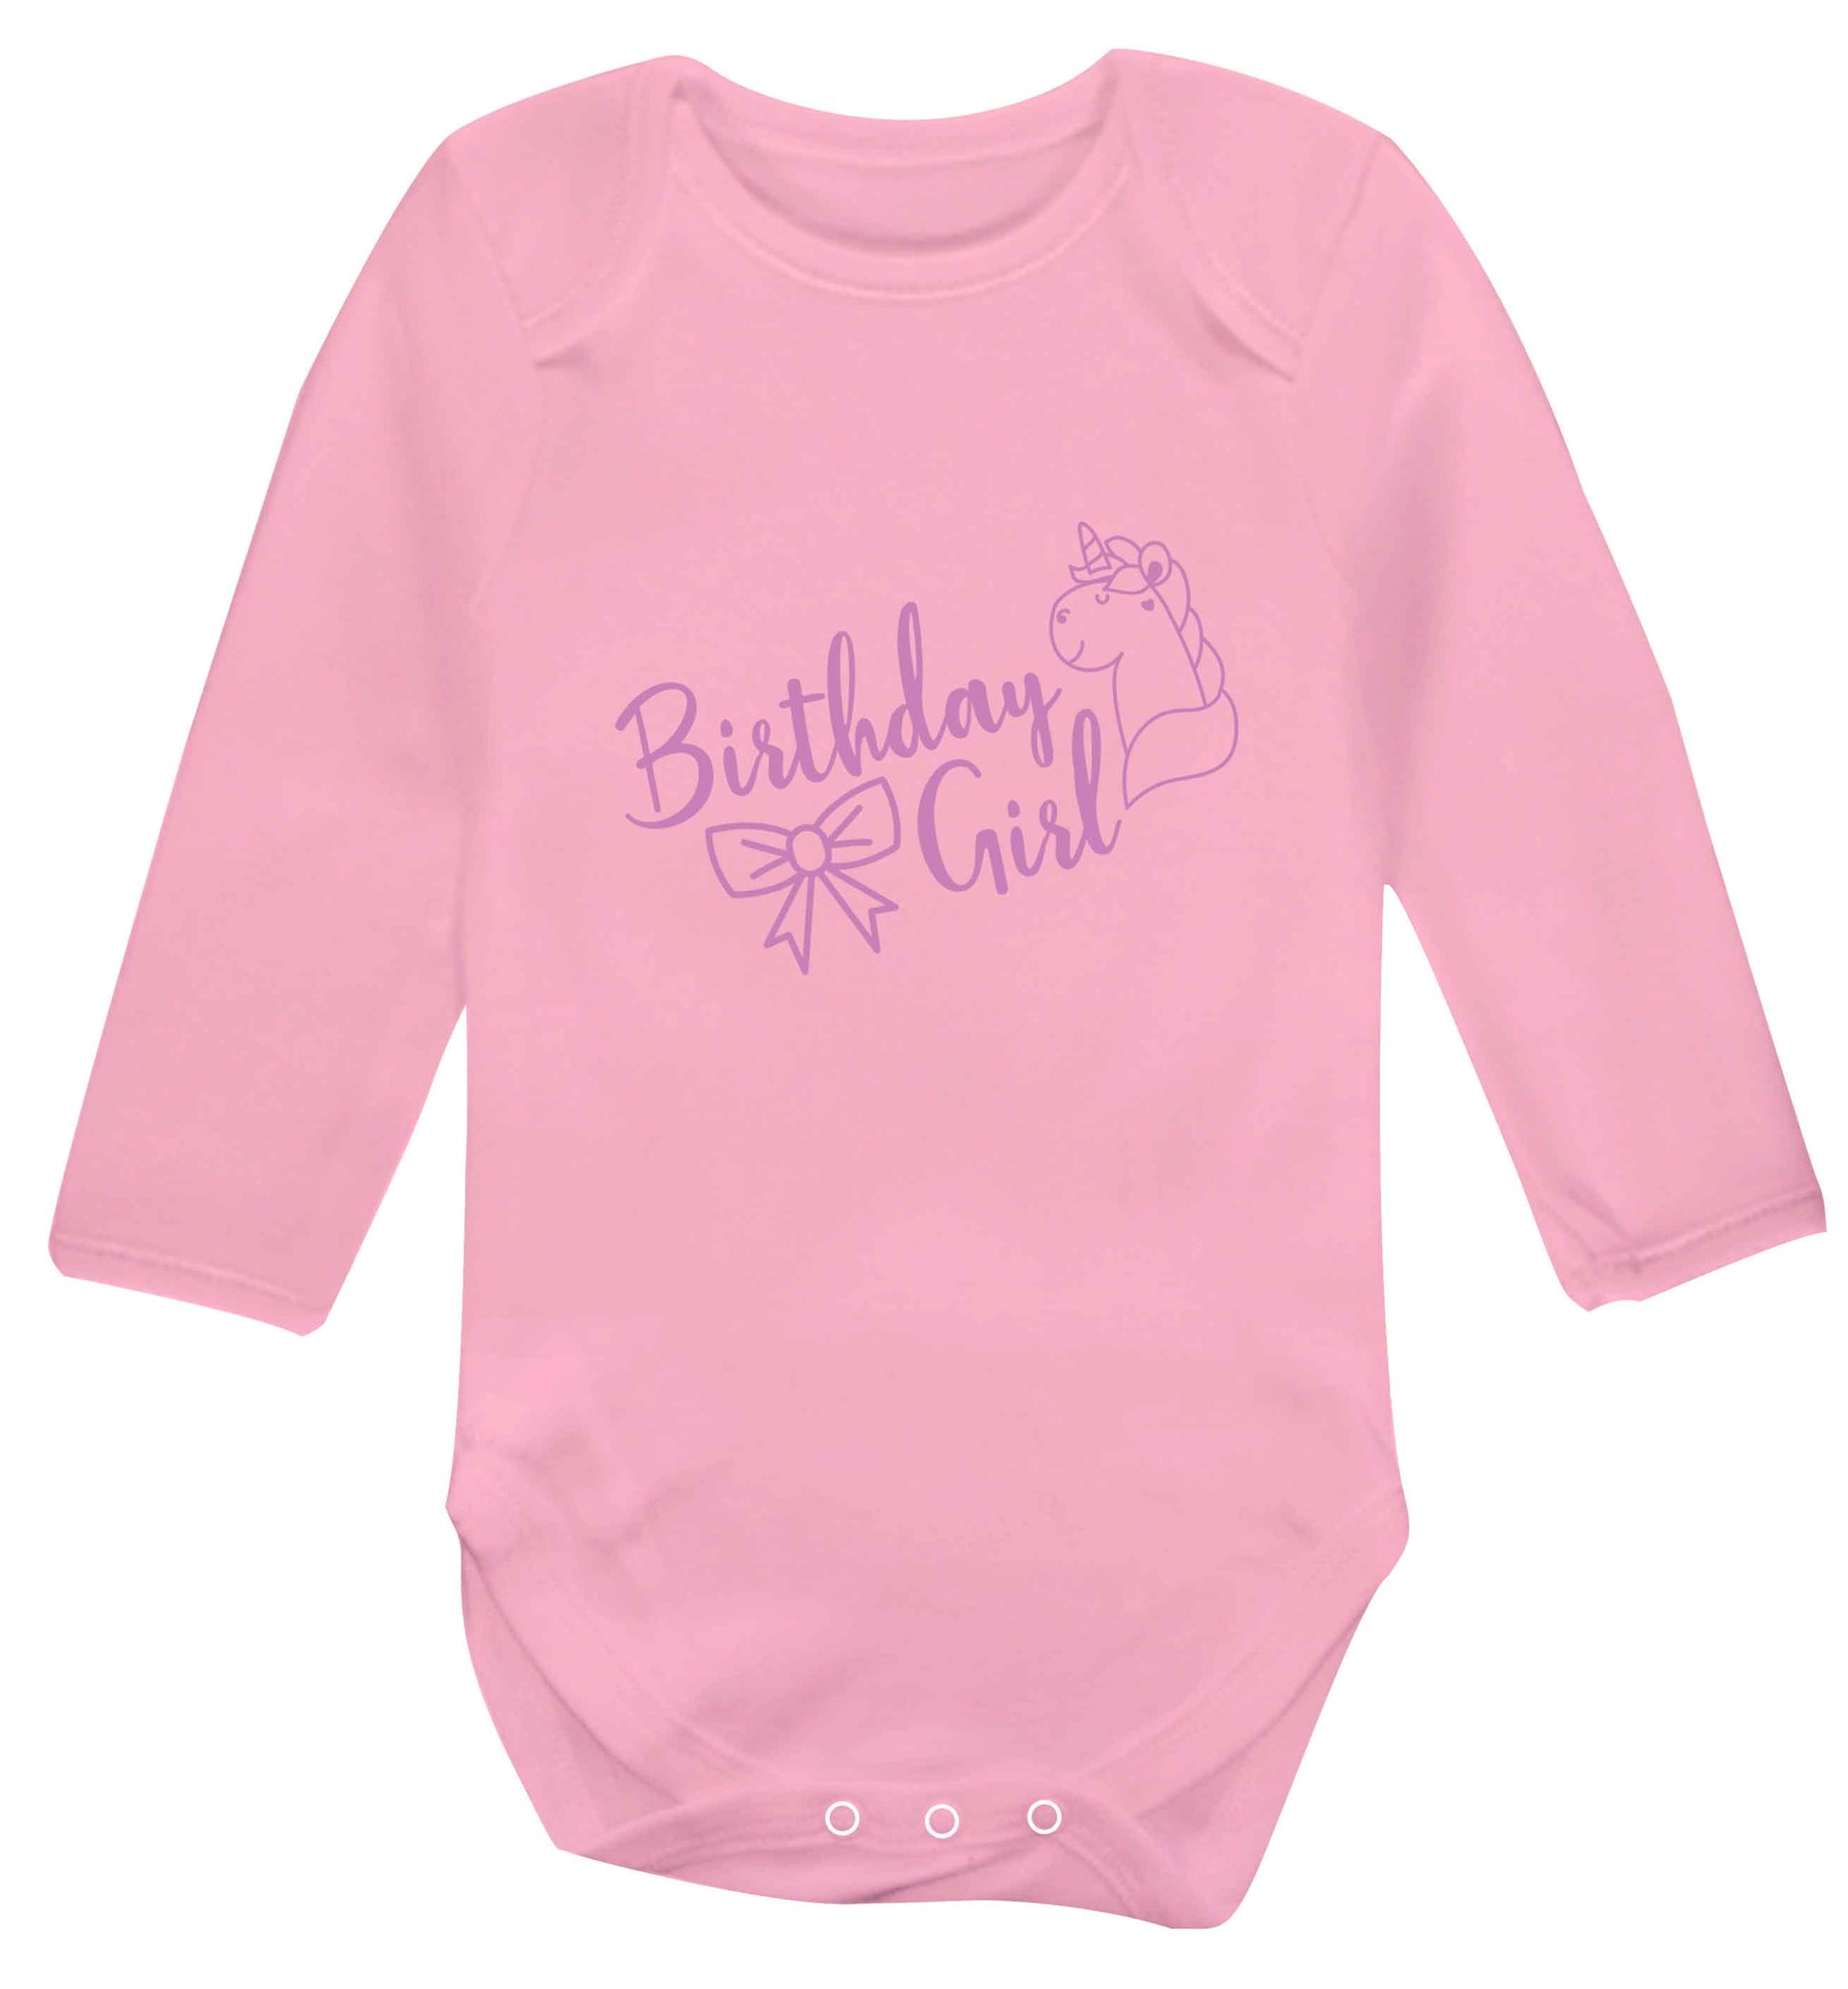 Birthday girl baby vest long sleeved pale pink 6-12 months